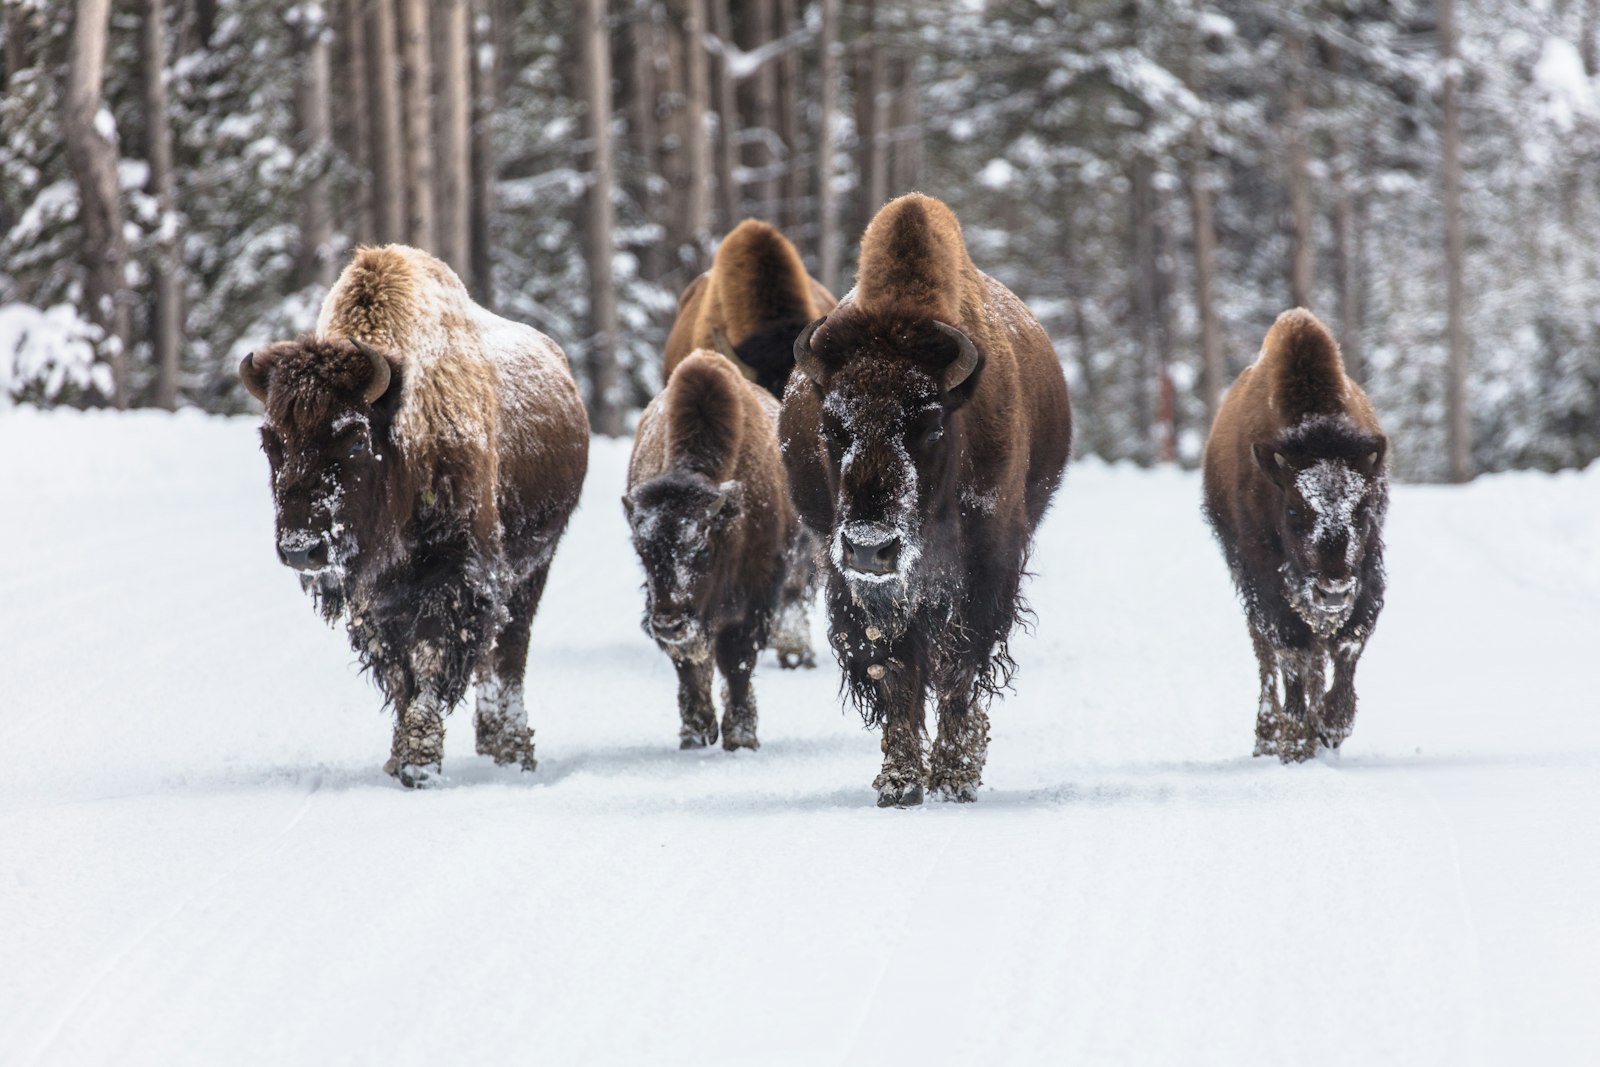 A small group of bison in the snow